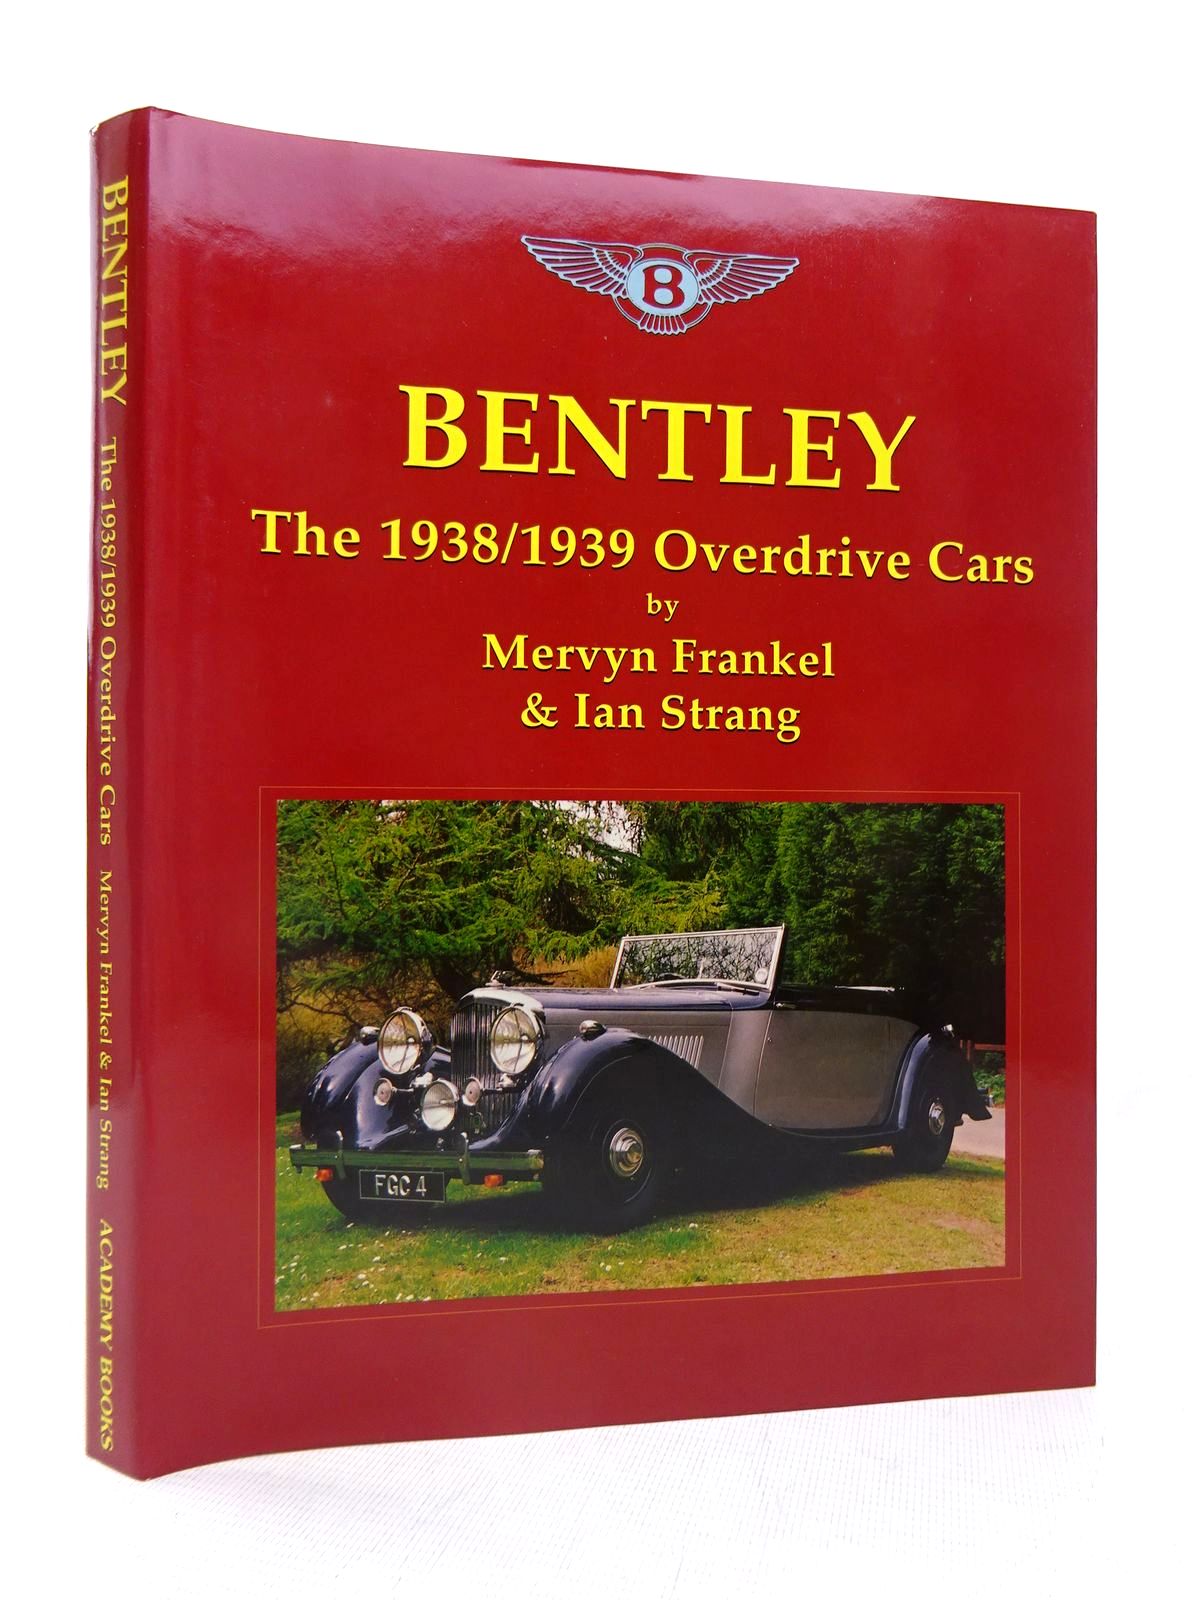 Bentley The 1938/1939 Overdrive Cars